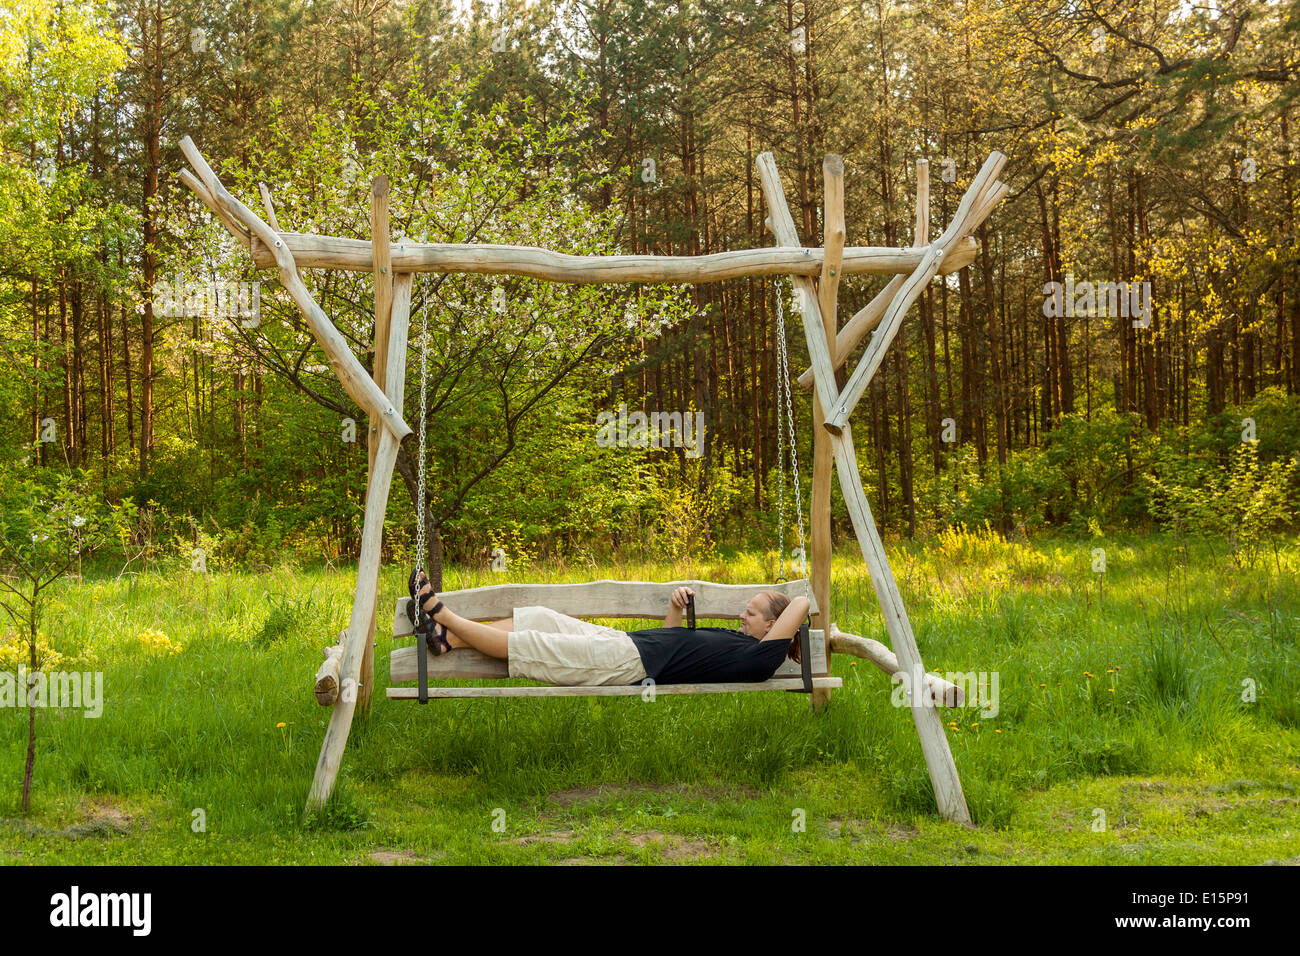 Adult man reading an ebook why lying on a swing Stock Photo